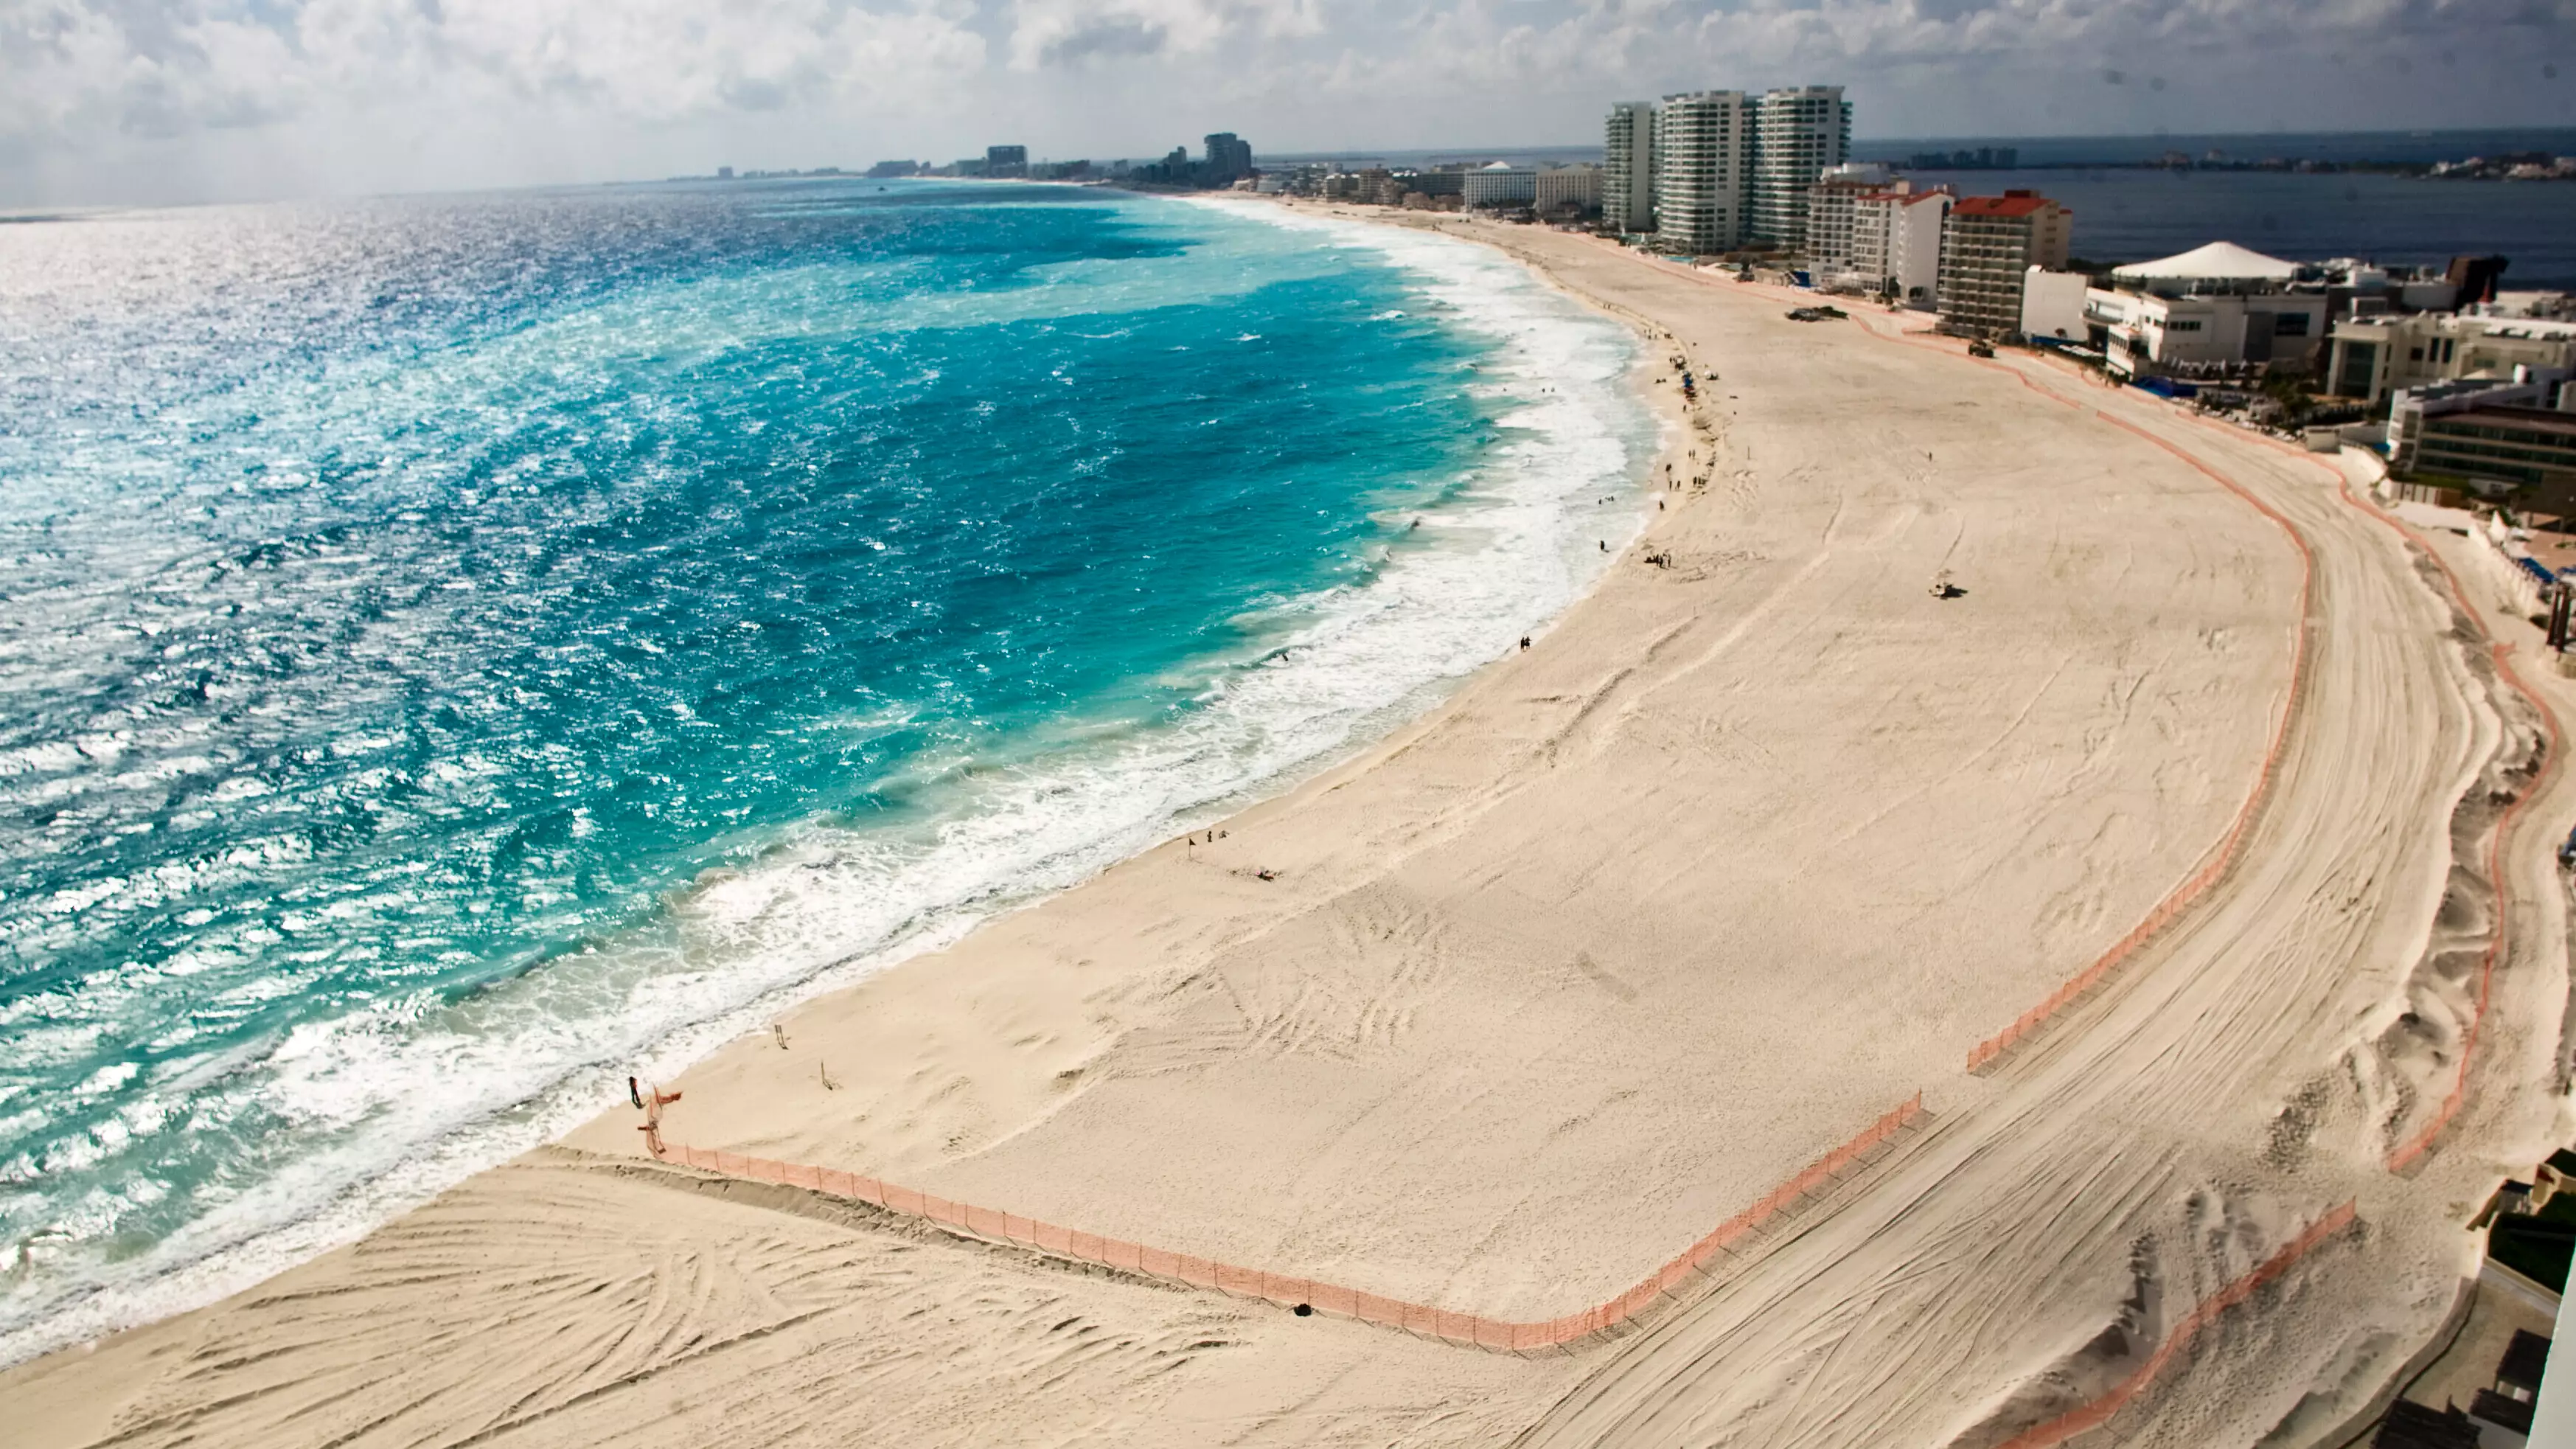 Mexico's Cancún Holiday Hotspot Offering Free Hotels, Meals And Theme Park Entry